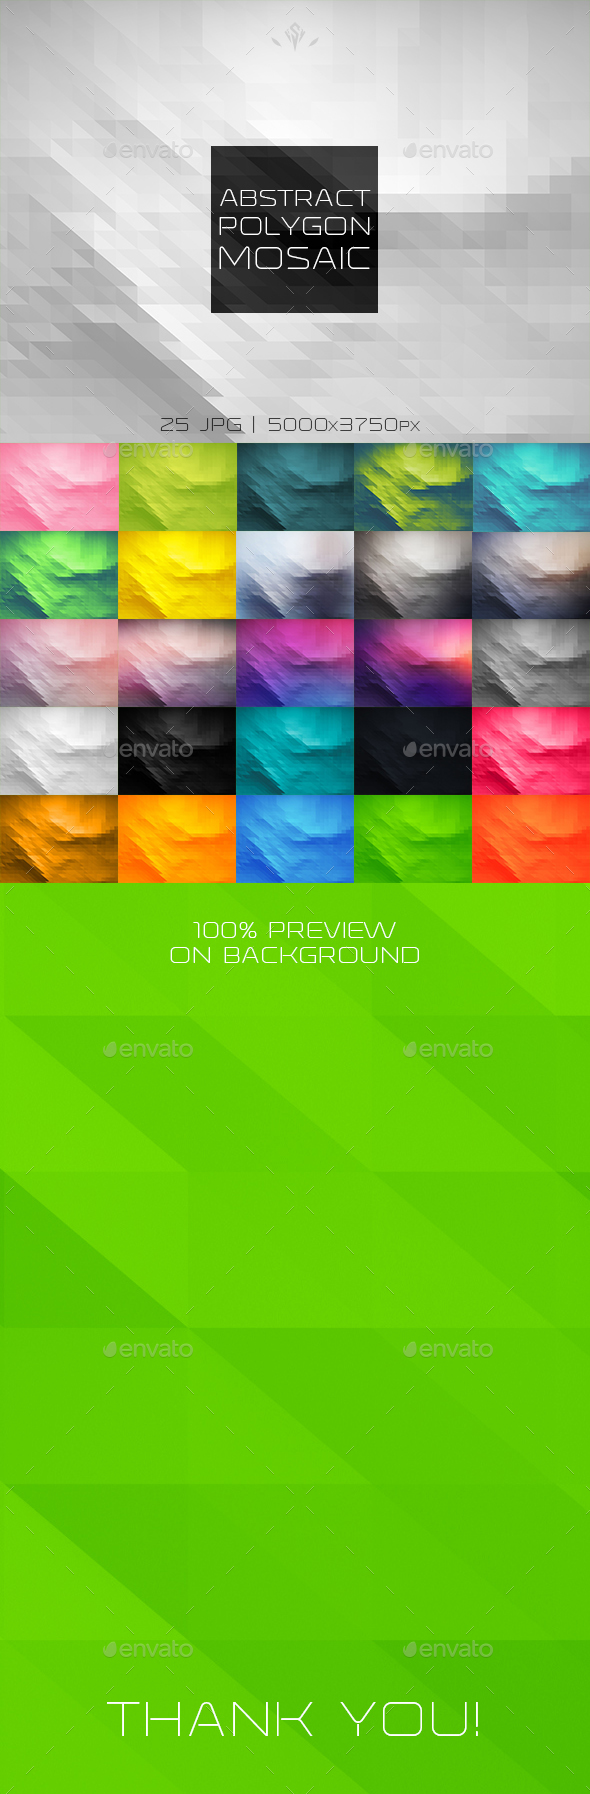 Abstract Polygon Mosaic Backgrounds